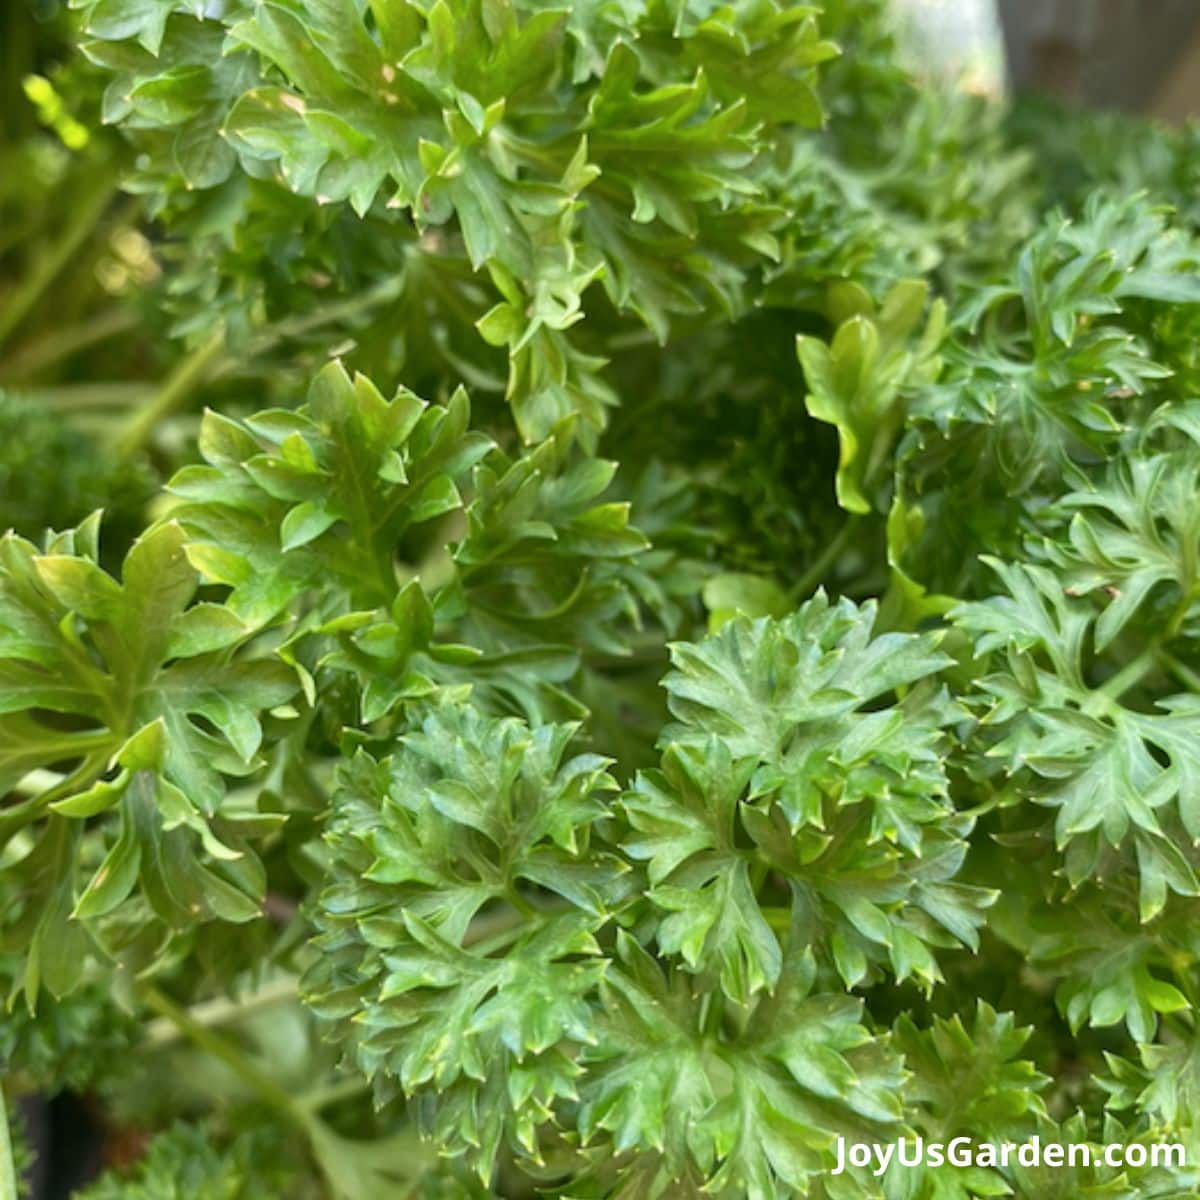 Close up of curly leaf parsley, an popular herb used for cooking. 